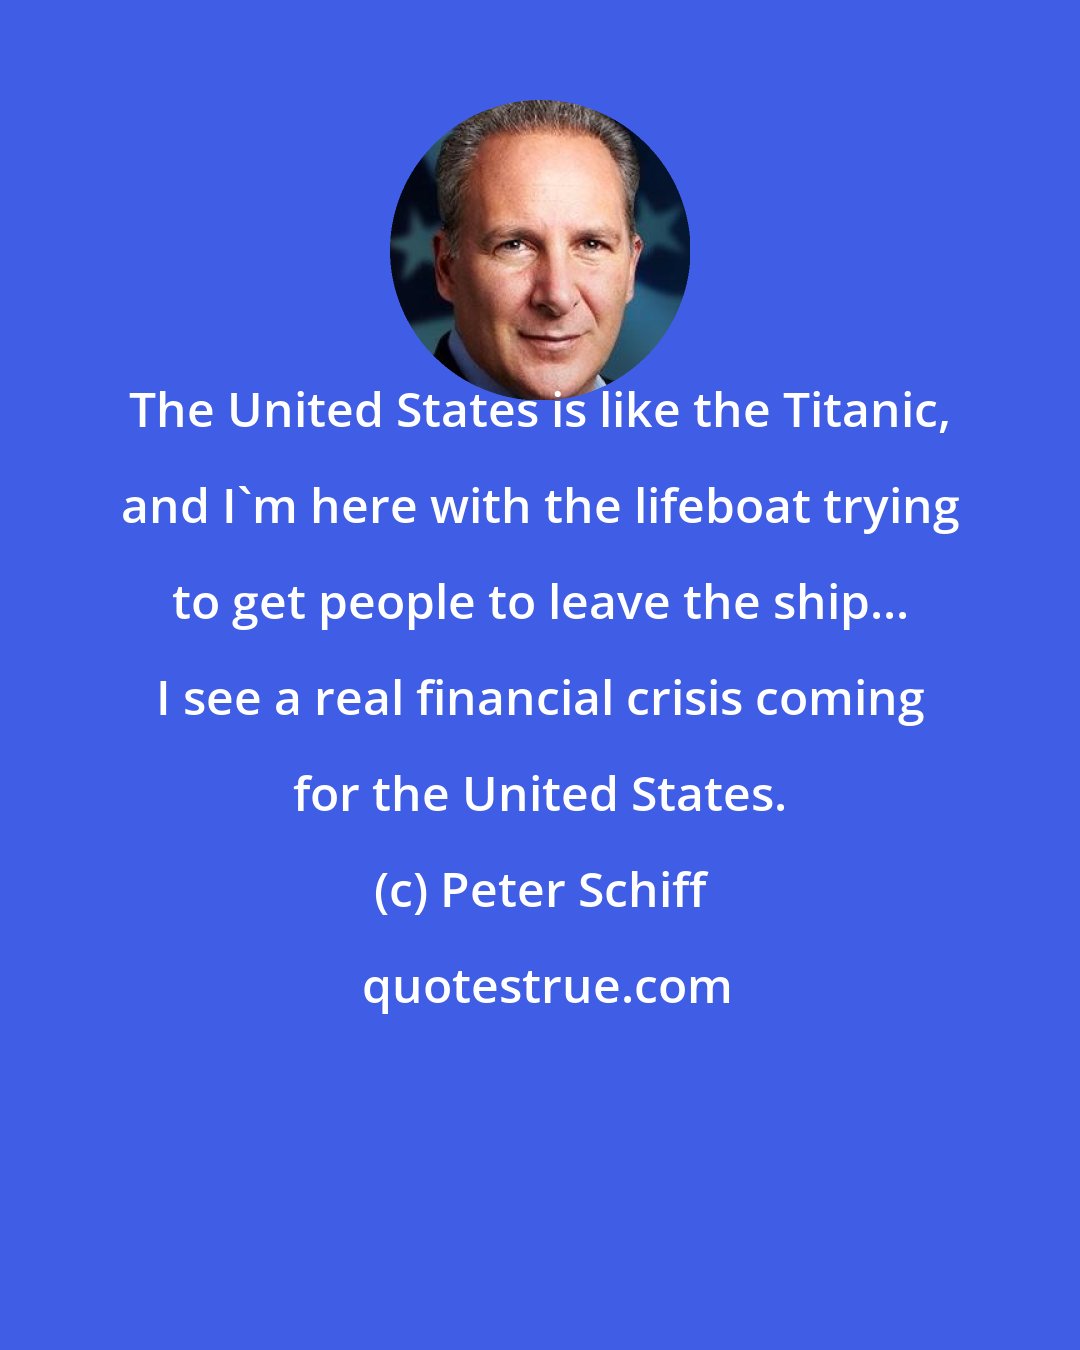 Peter Schiff: The United States is like the Titanic, and I'm here with the lifeboat trying to get people to leave the ship... I see a real financial crisis coming for the United States.